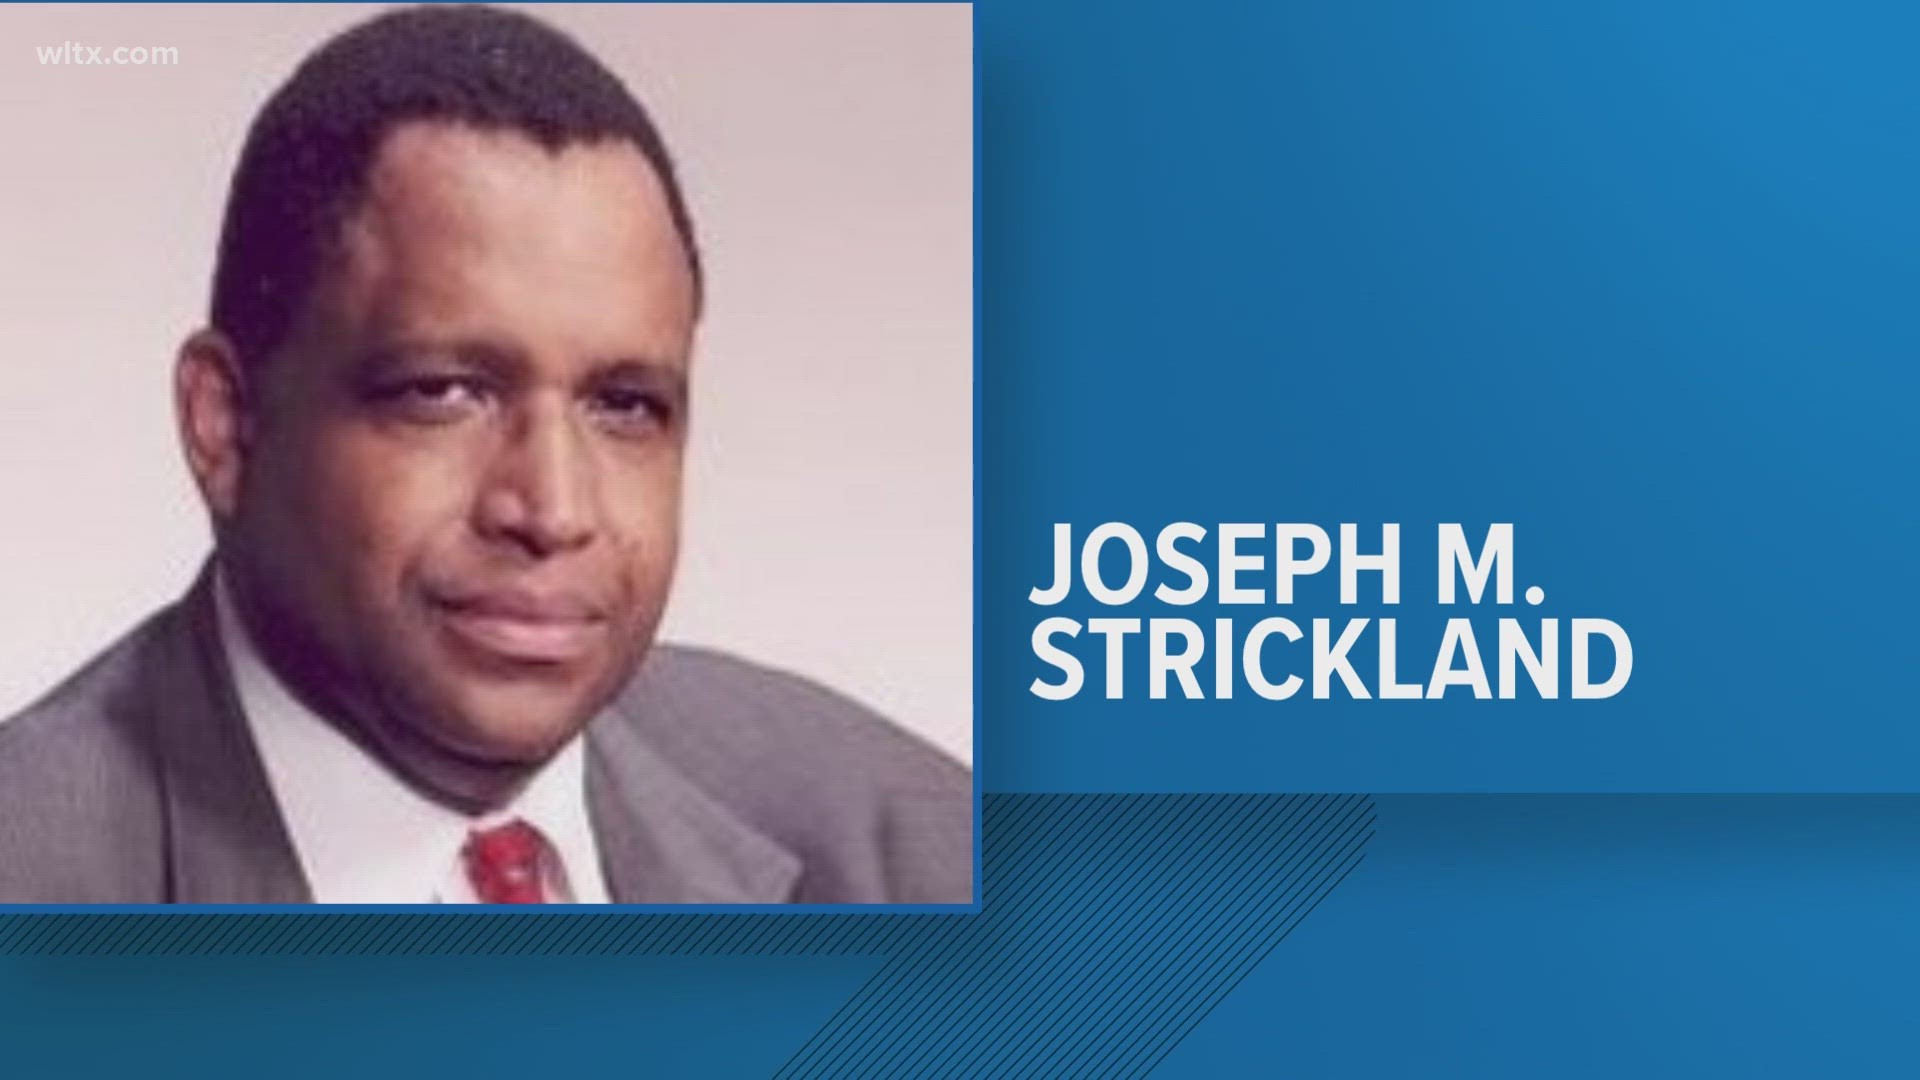 The State Supreme Court says the Richland delegation has ten days to submit Joseph Strickland's name for the office of Master of Equity.